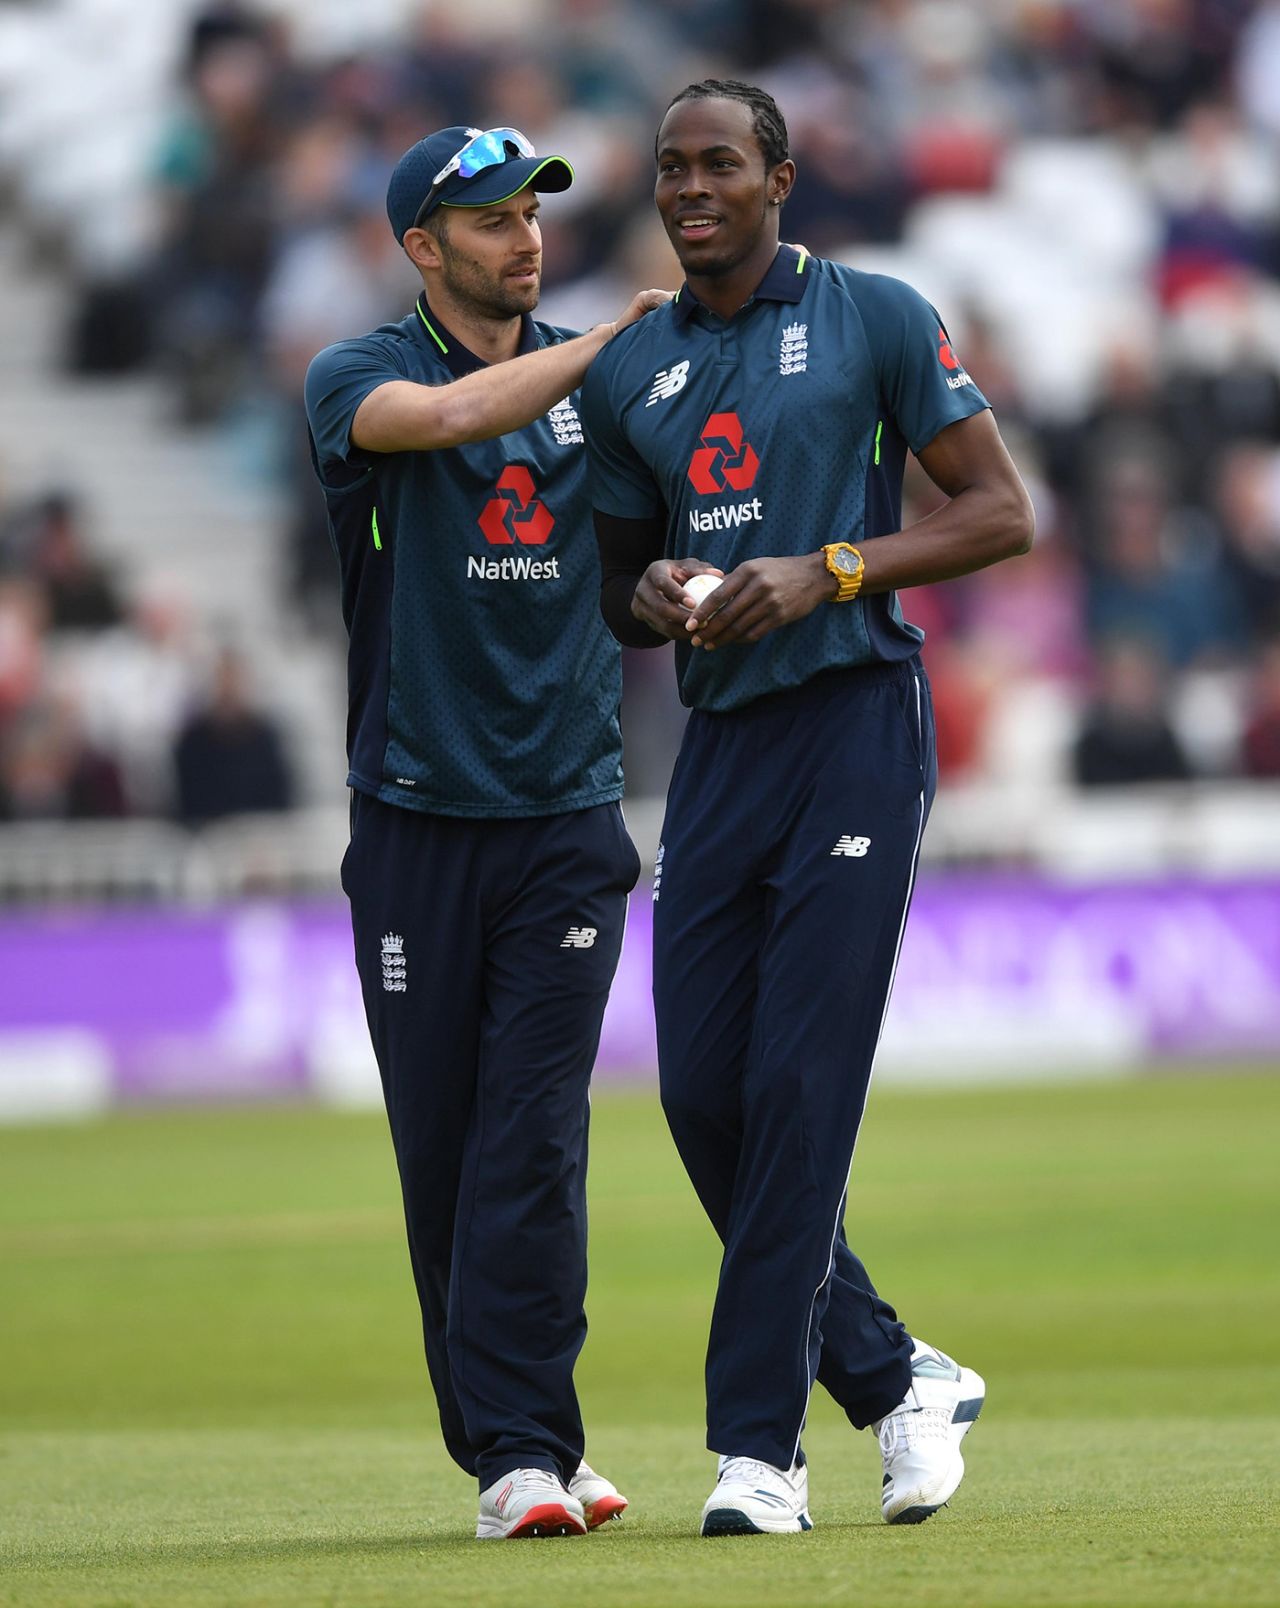 Mark Wood and Jofra Archer both returned to the starting line-up, England v Pakistan, 4th ODI, Trent Bridge, May 17, 2019